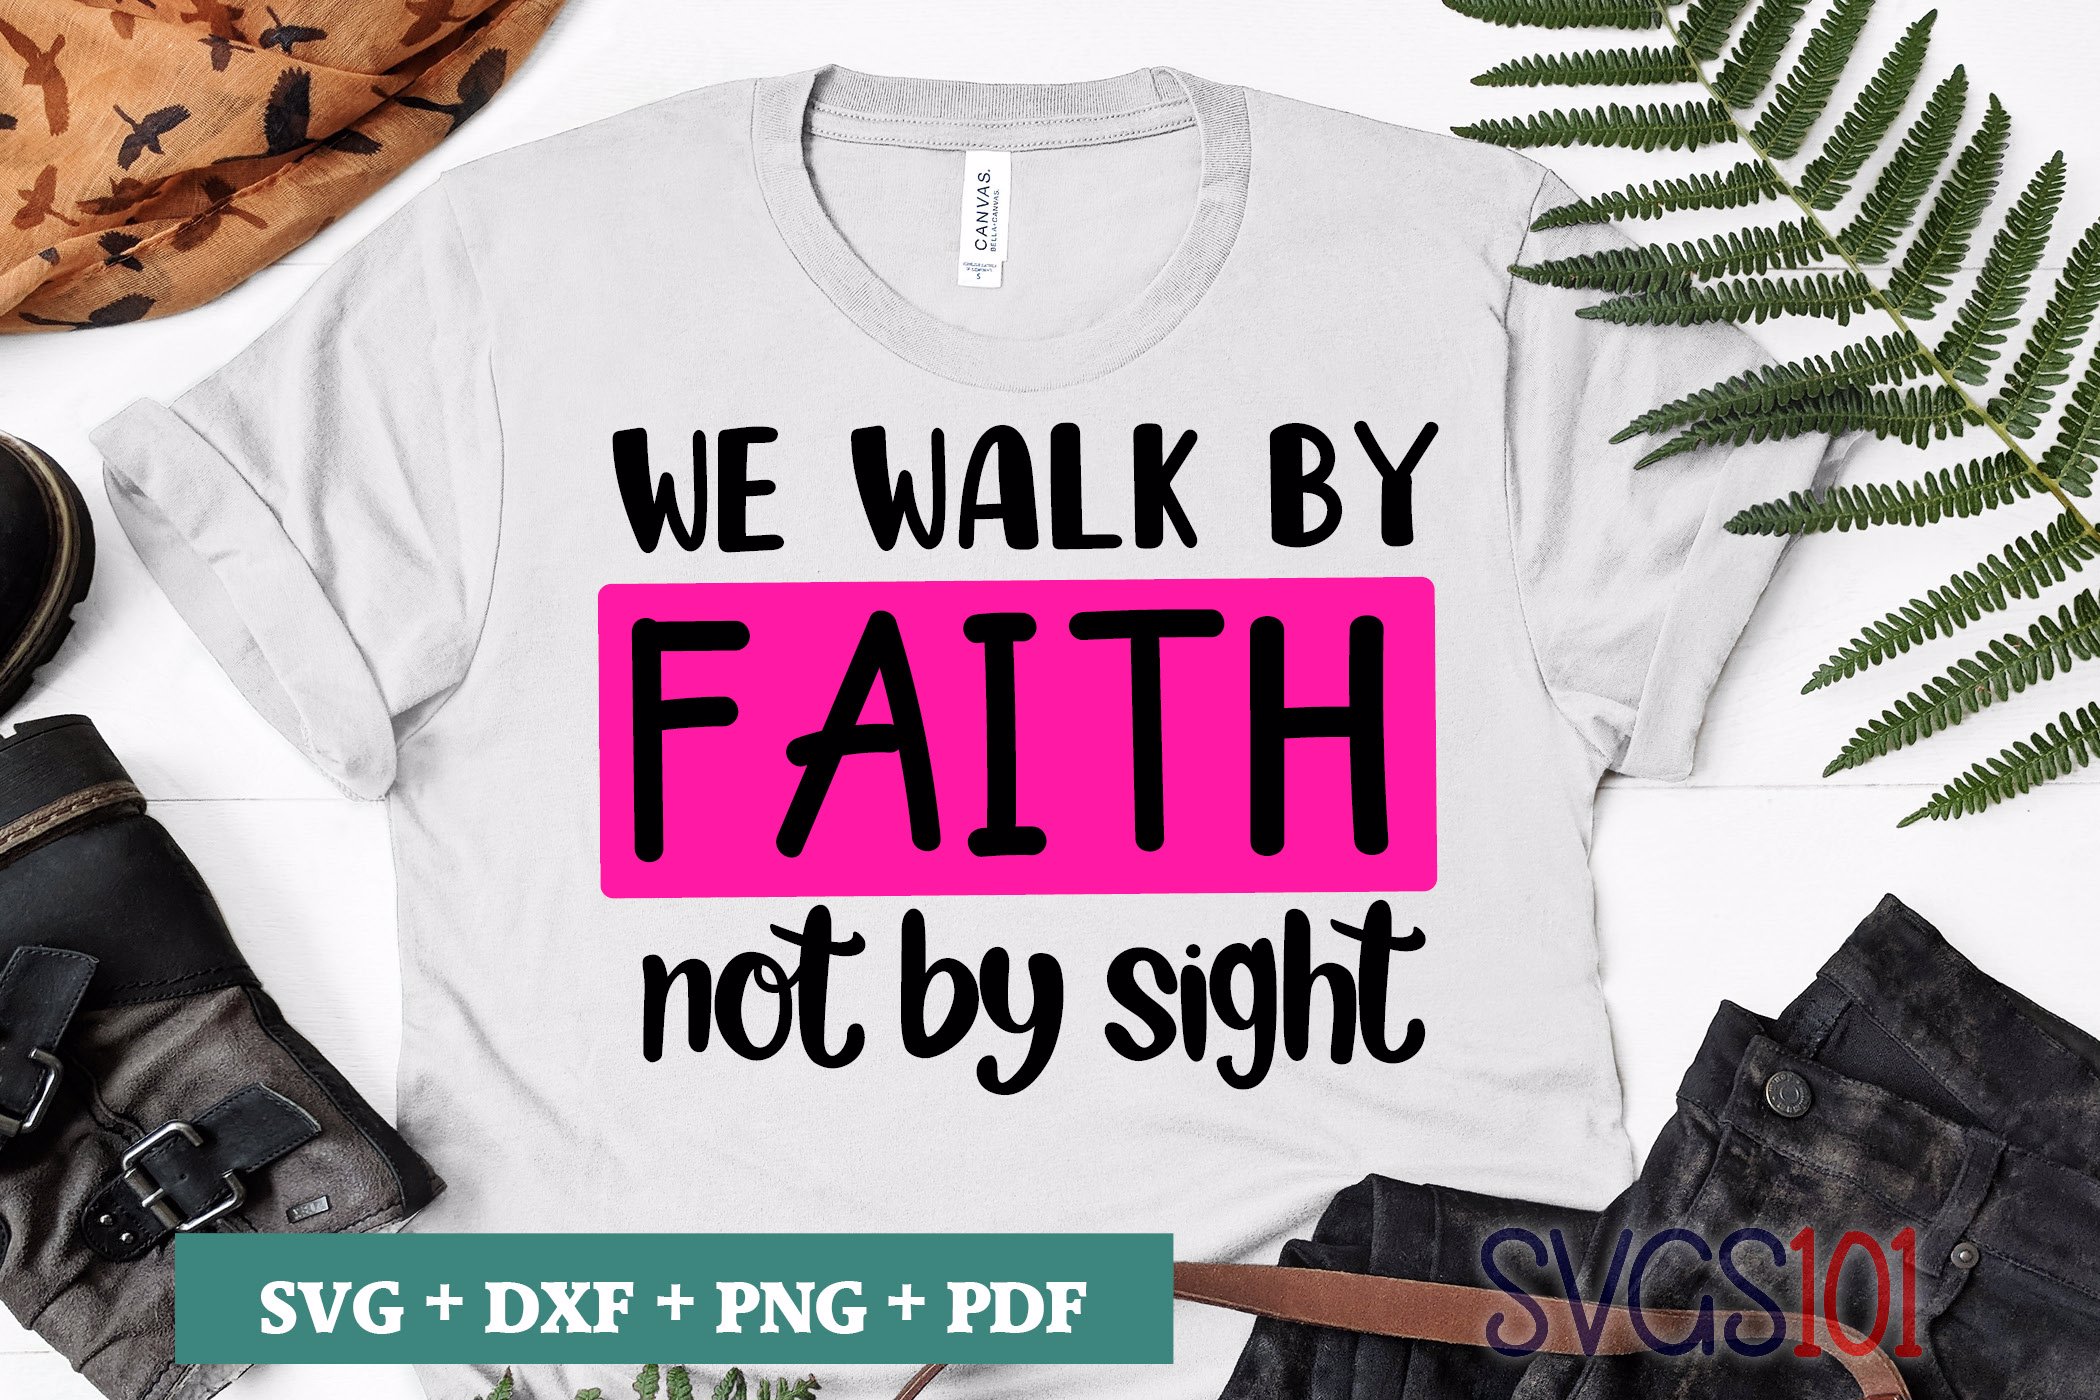 We Walk By Faith Not By Sight SVG Cuttable file - DXF, EPS, PNG, PDF ...